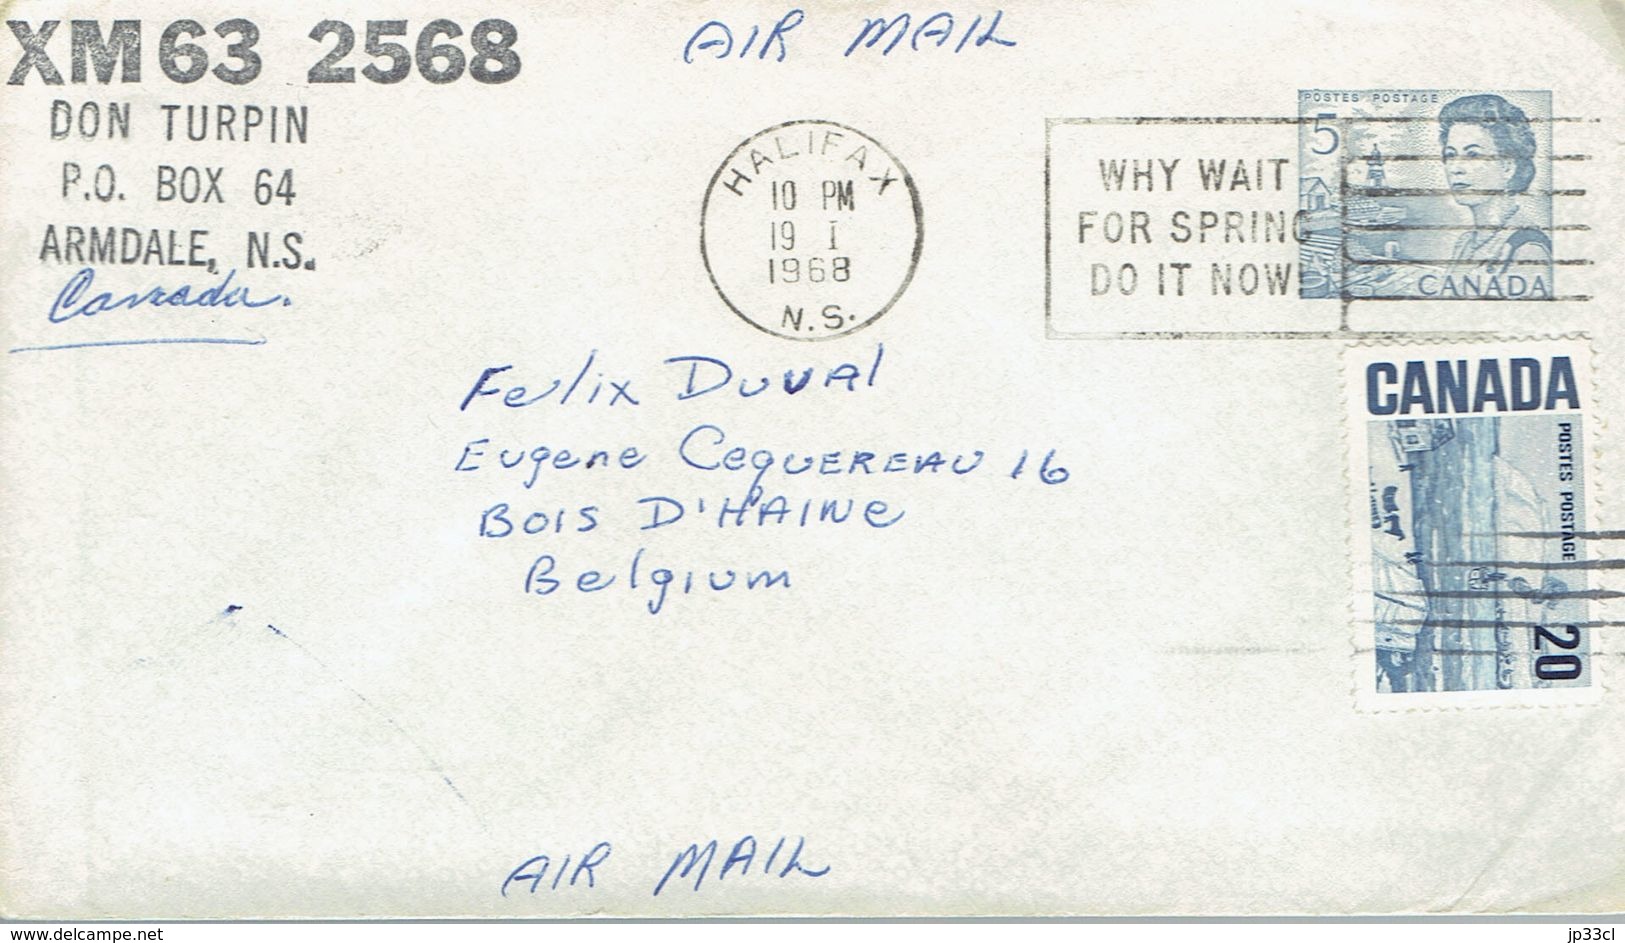 Old QSL With Envelope From Don Turpin "The Bandit", Armdale, N.S., Canada, XM63 2568 (Nov 67) - CB